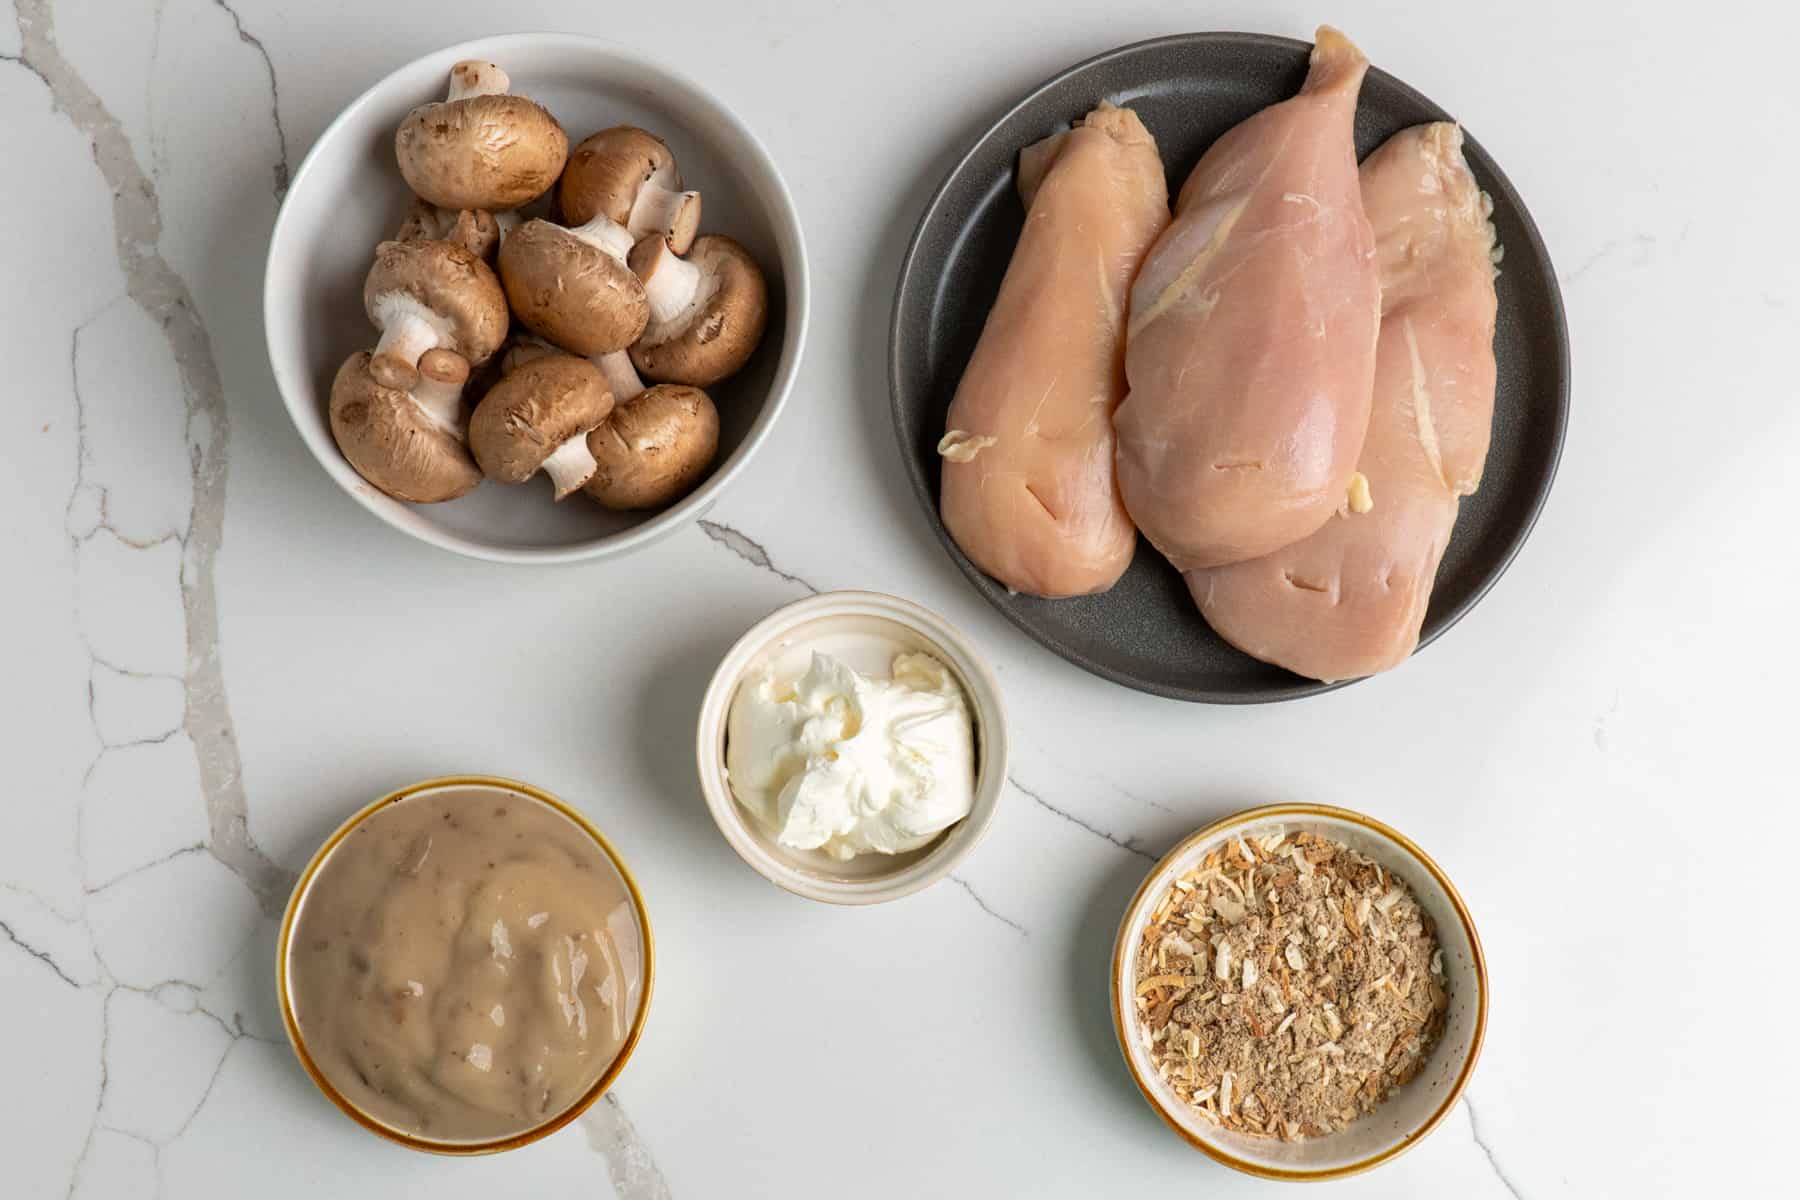 All the ingredients to make mushroom chicken.